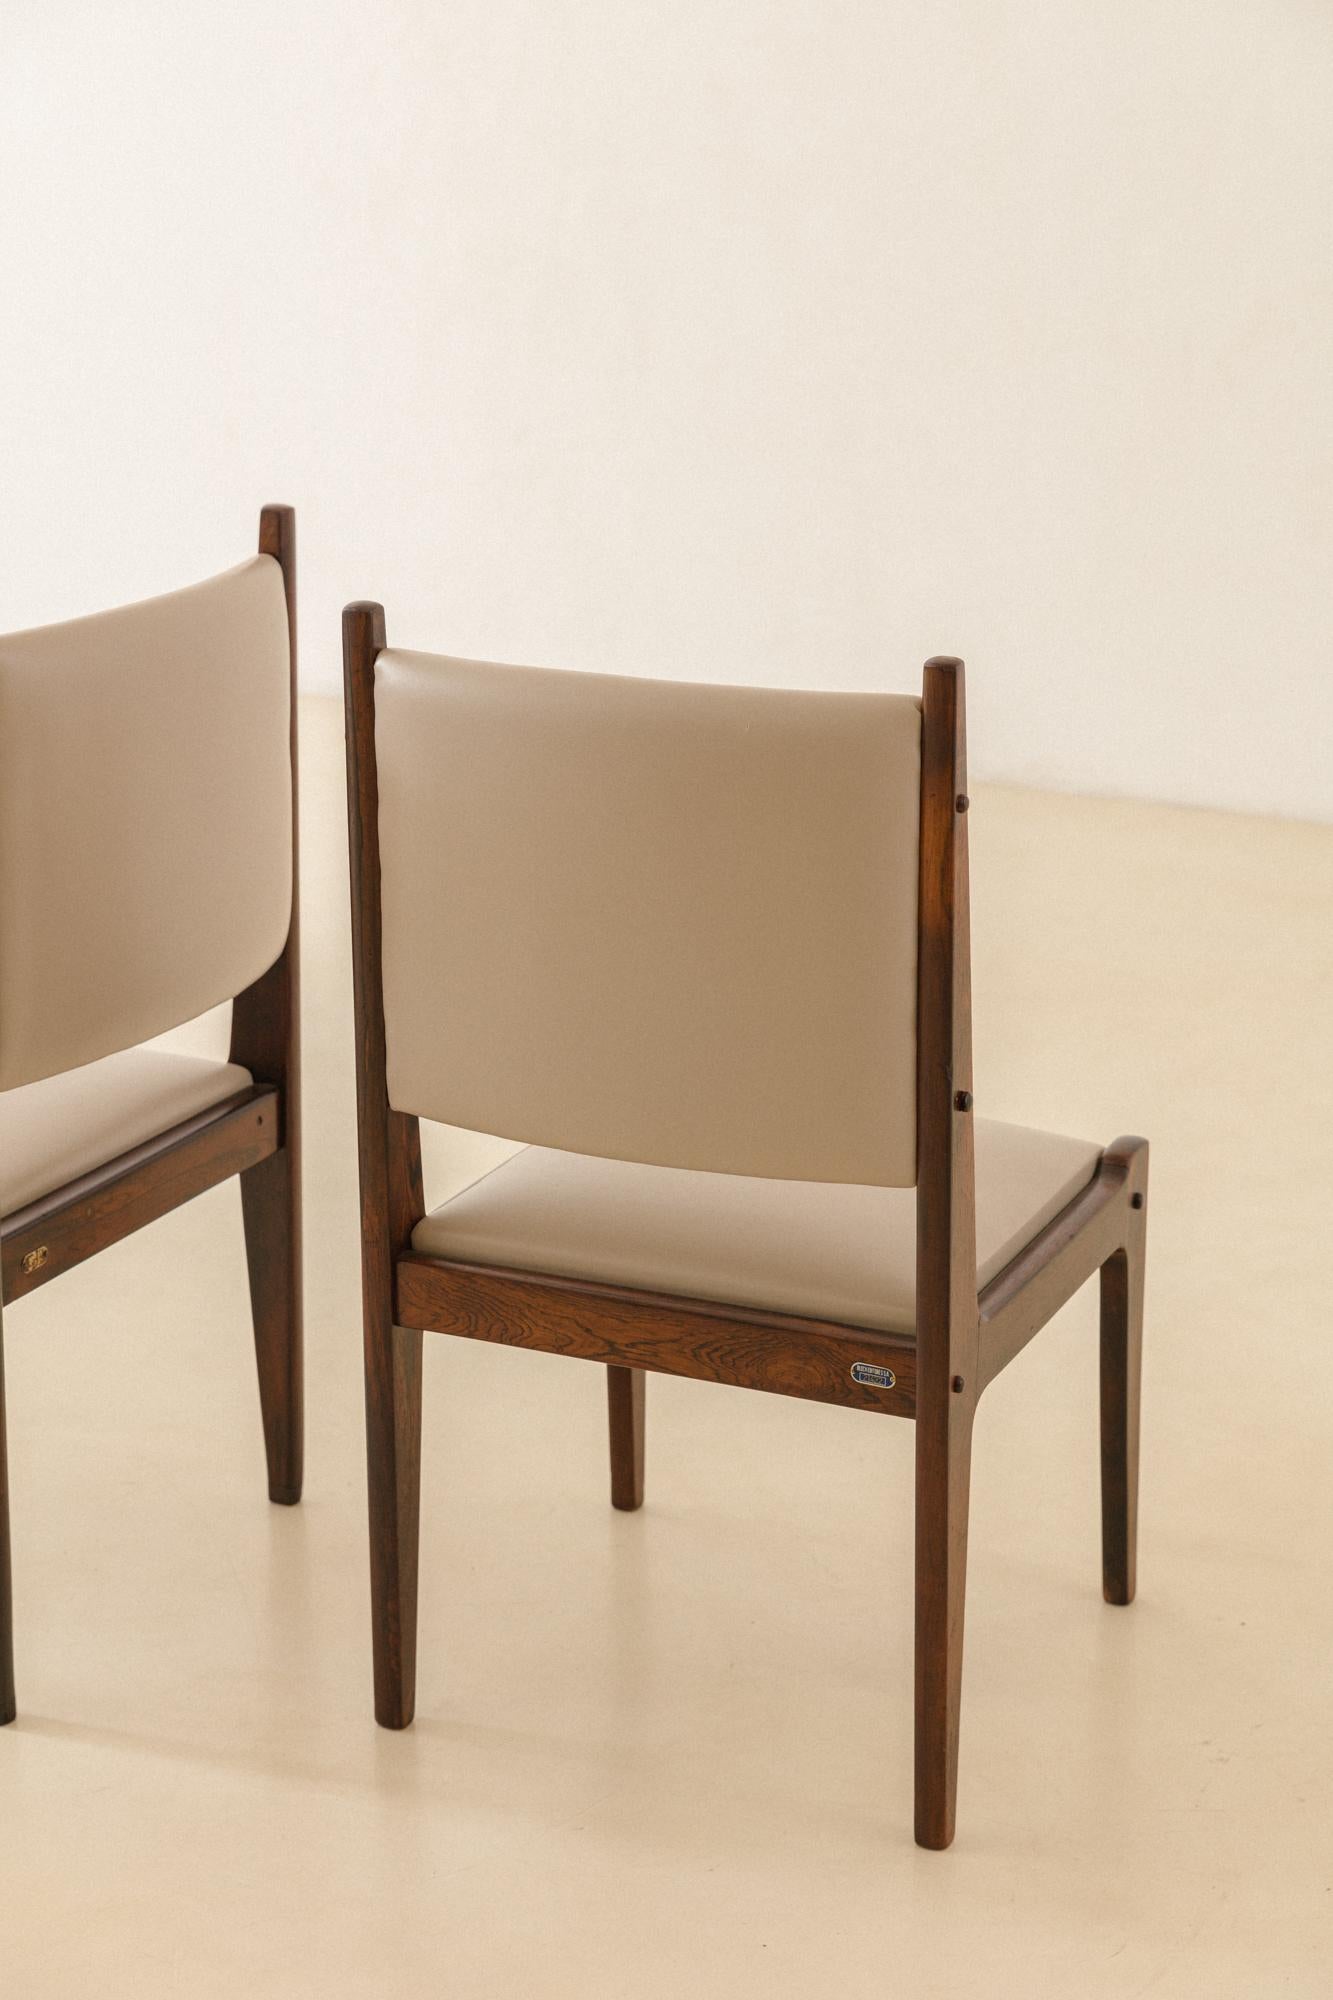 Mid-20th Century Bloch Chairs by Sergio Rodrigues, Brazilian Midcentury Design, 1964 For Sale